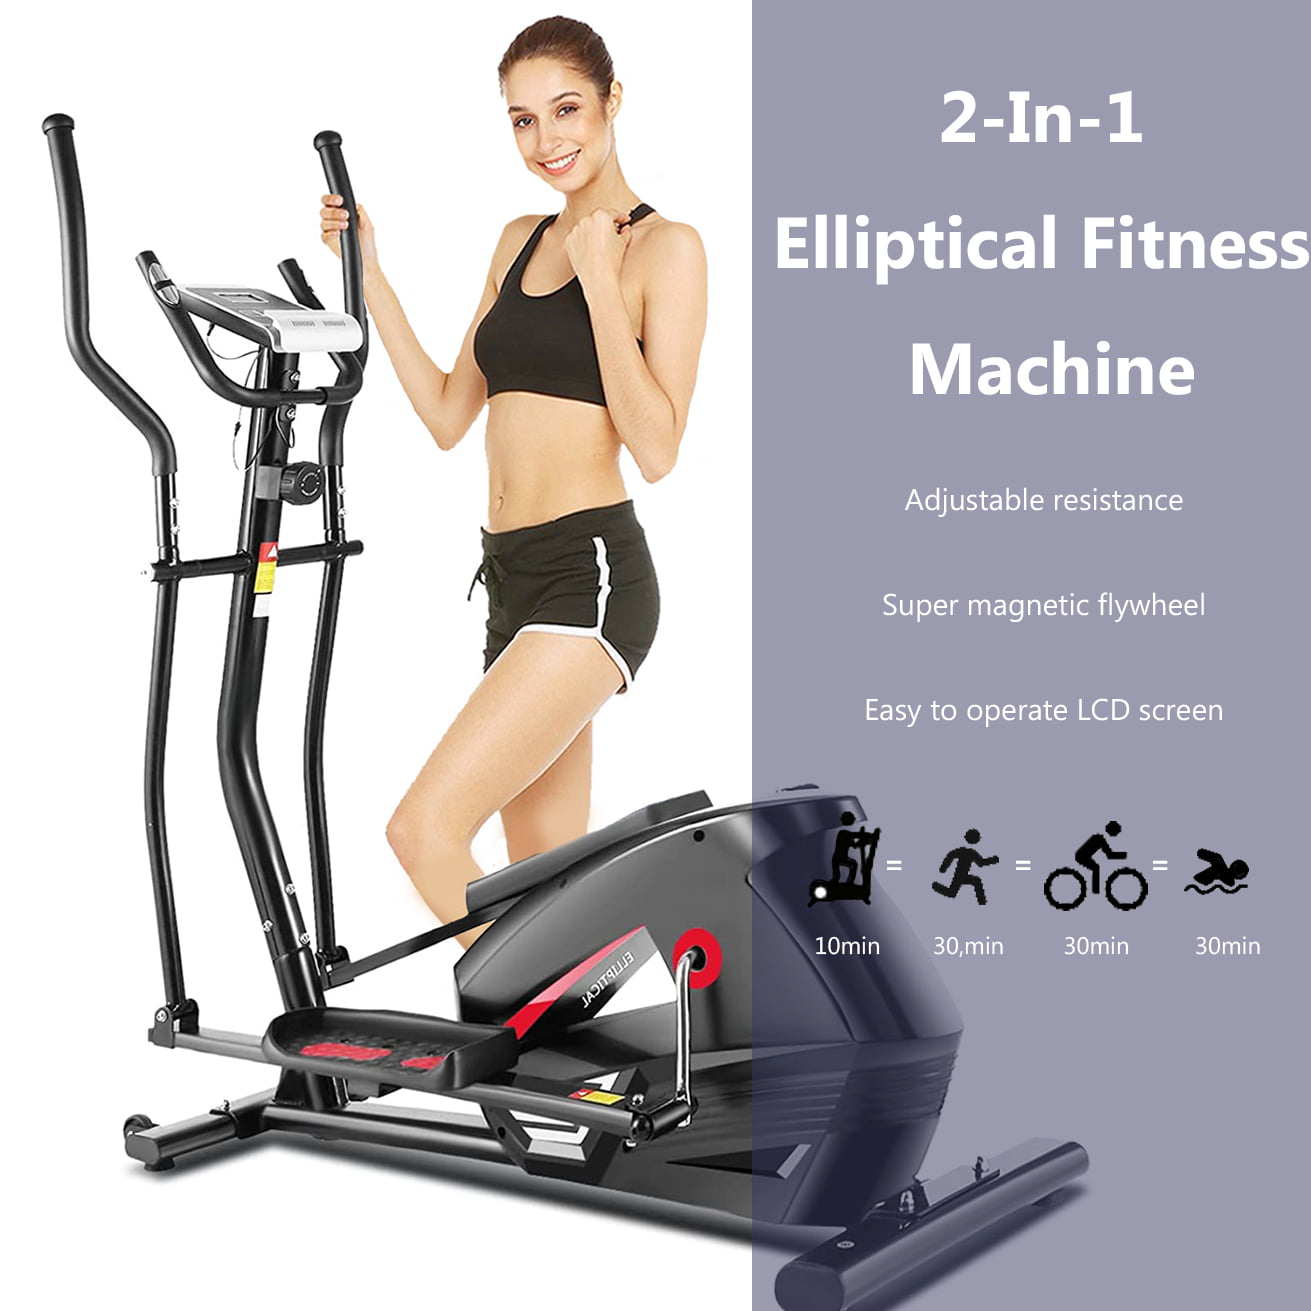 Best Elliptical Exercise Machine Trainer for Home Gym Workout Quiet & Smooth Magnetic Elliptical Cross Trainer Machine with LCD Monitor and Pulse Rate Grips ANCHEER Elliptical Machine 